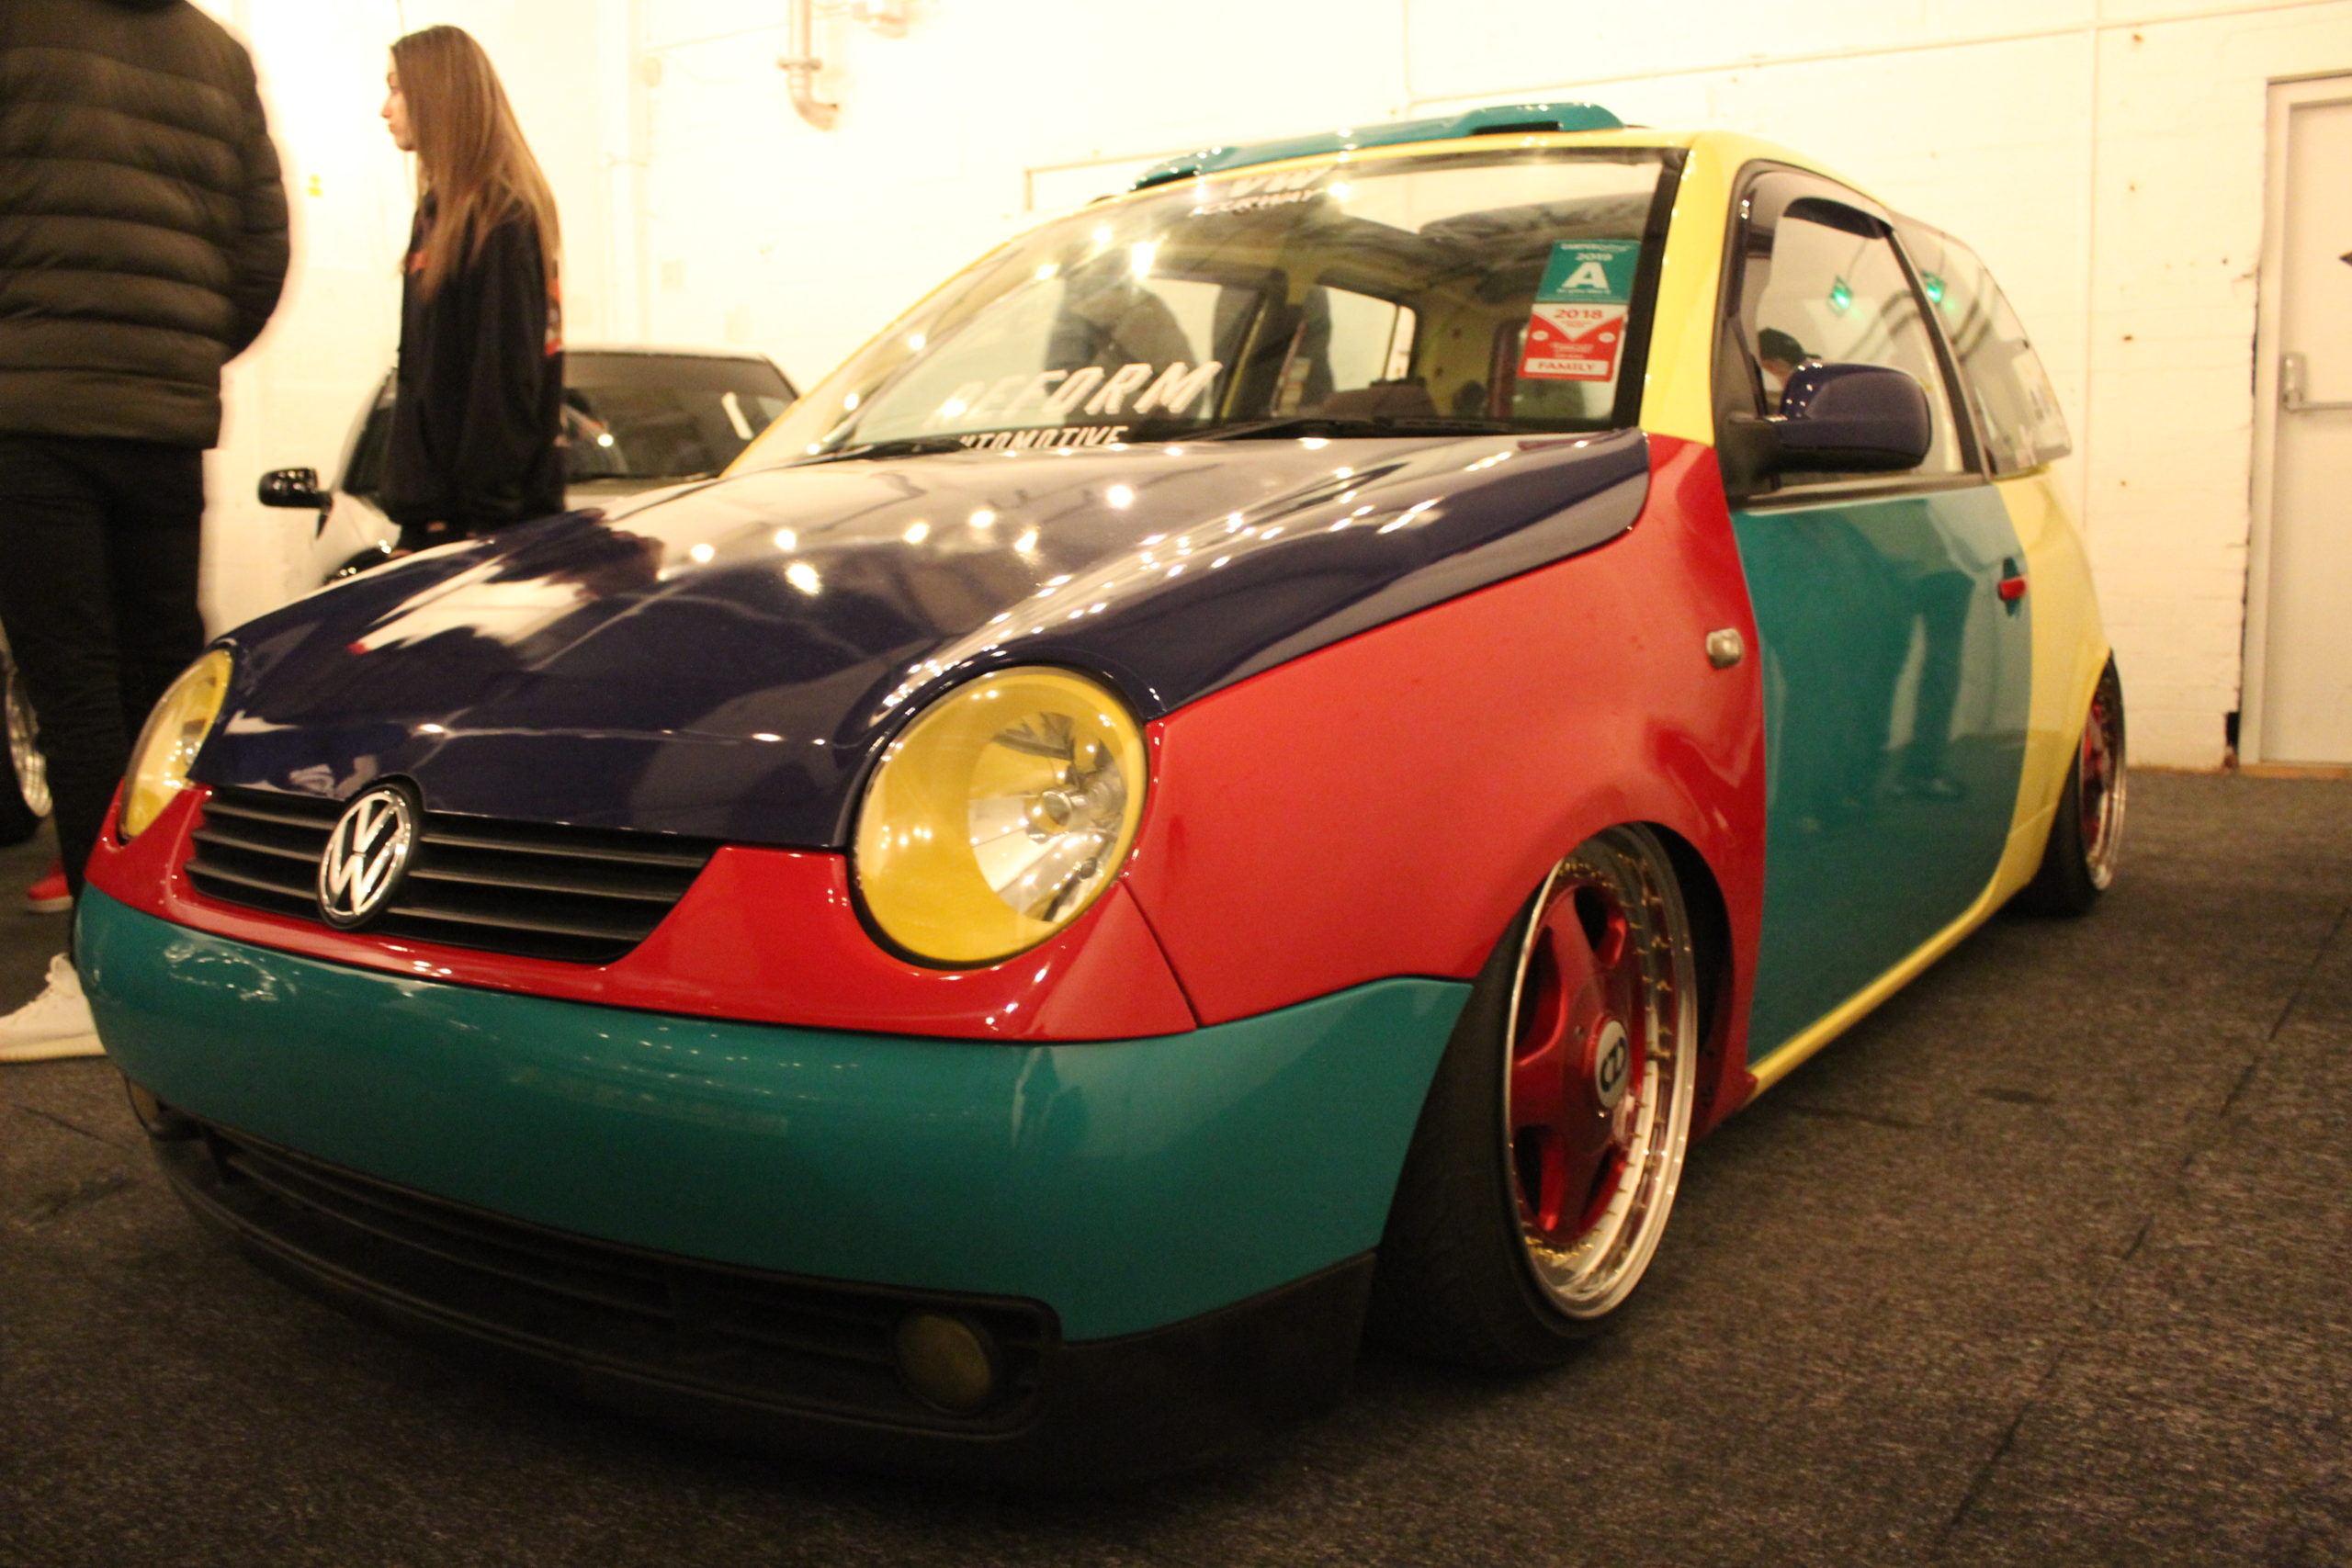 MODIFIED LOWERED VW POLO HARLEQUIN